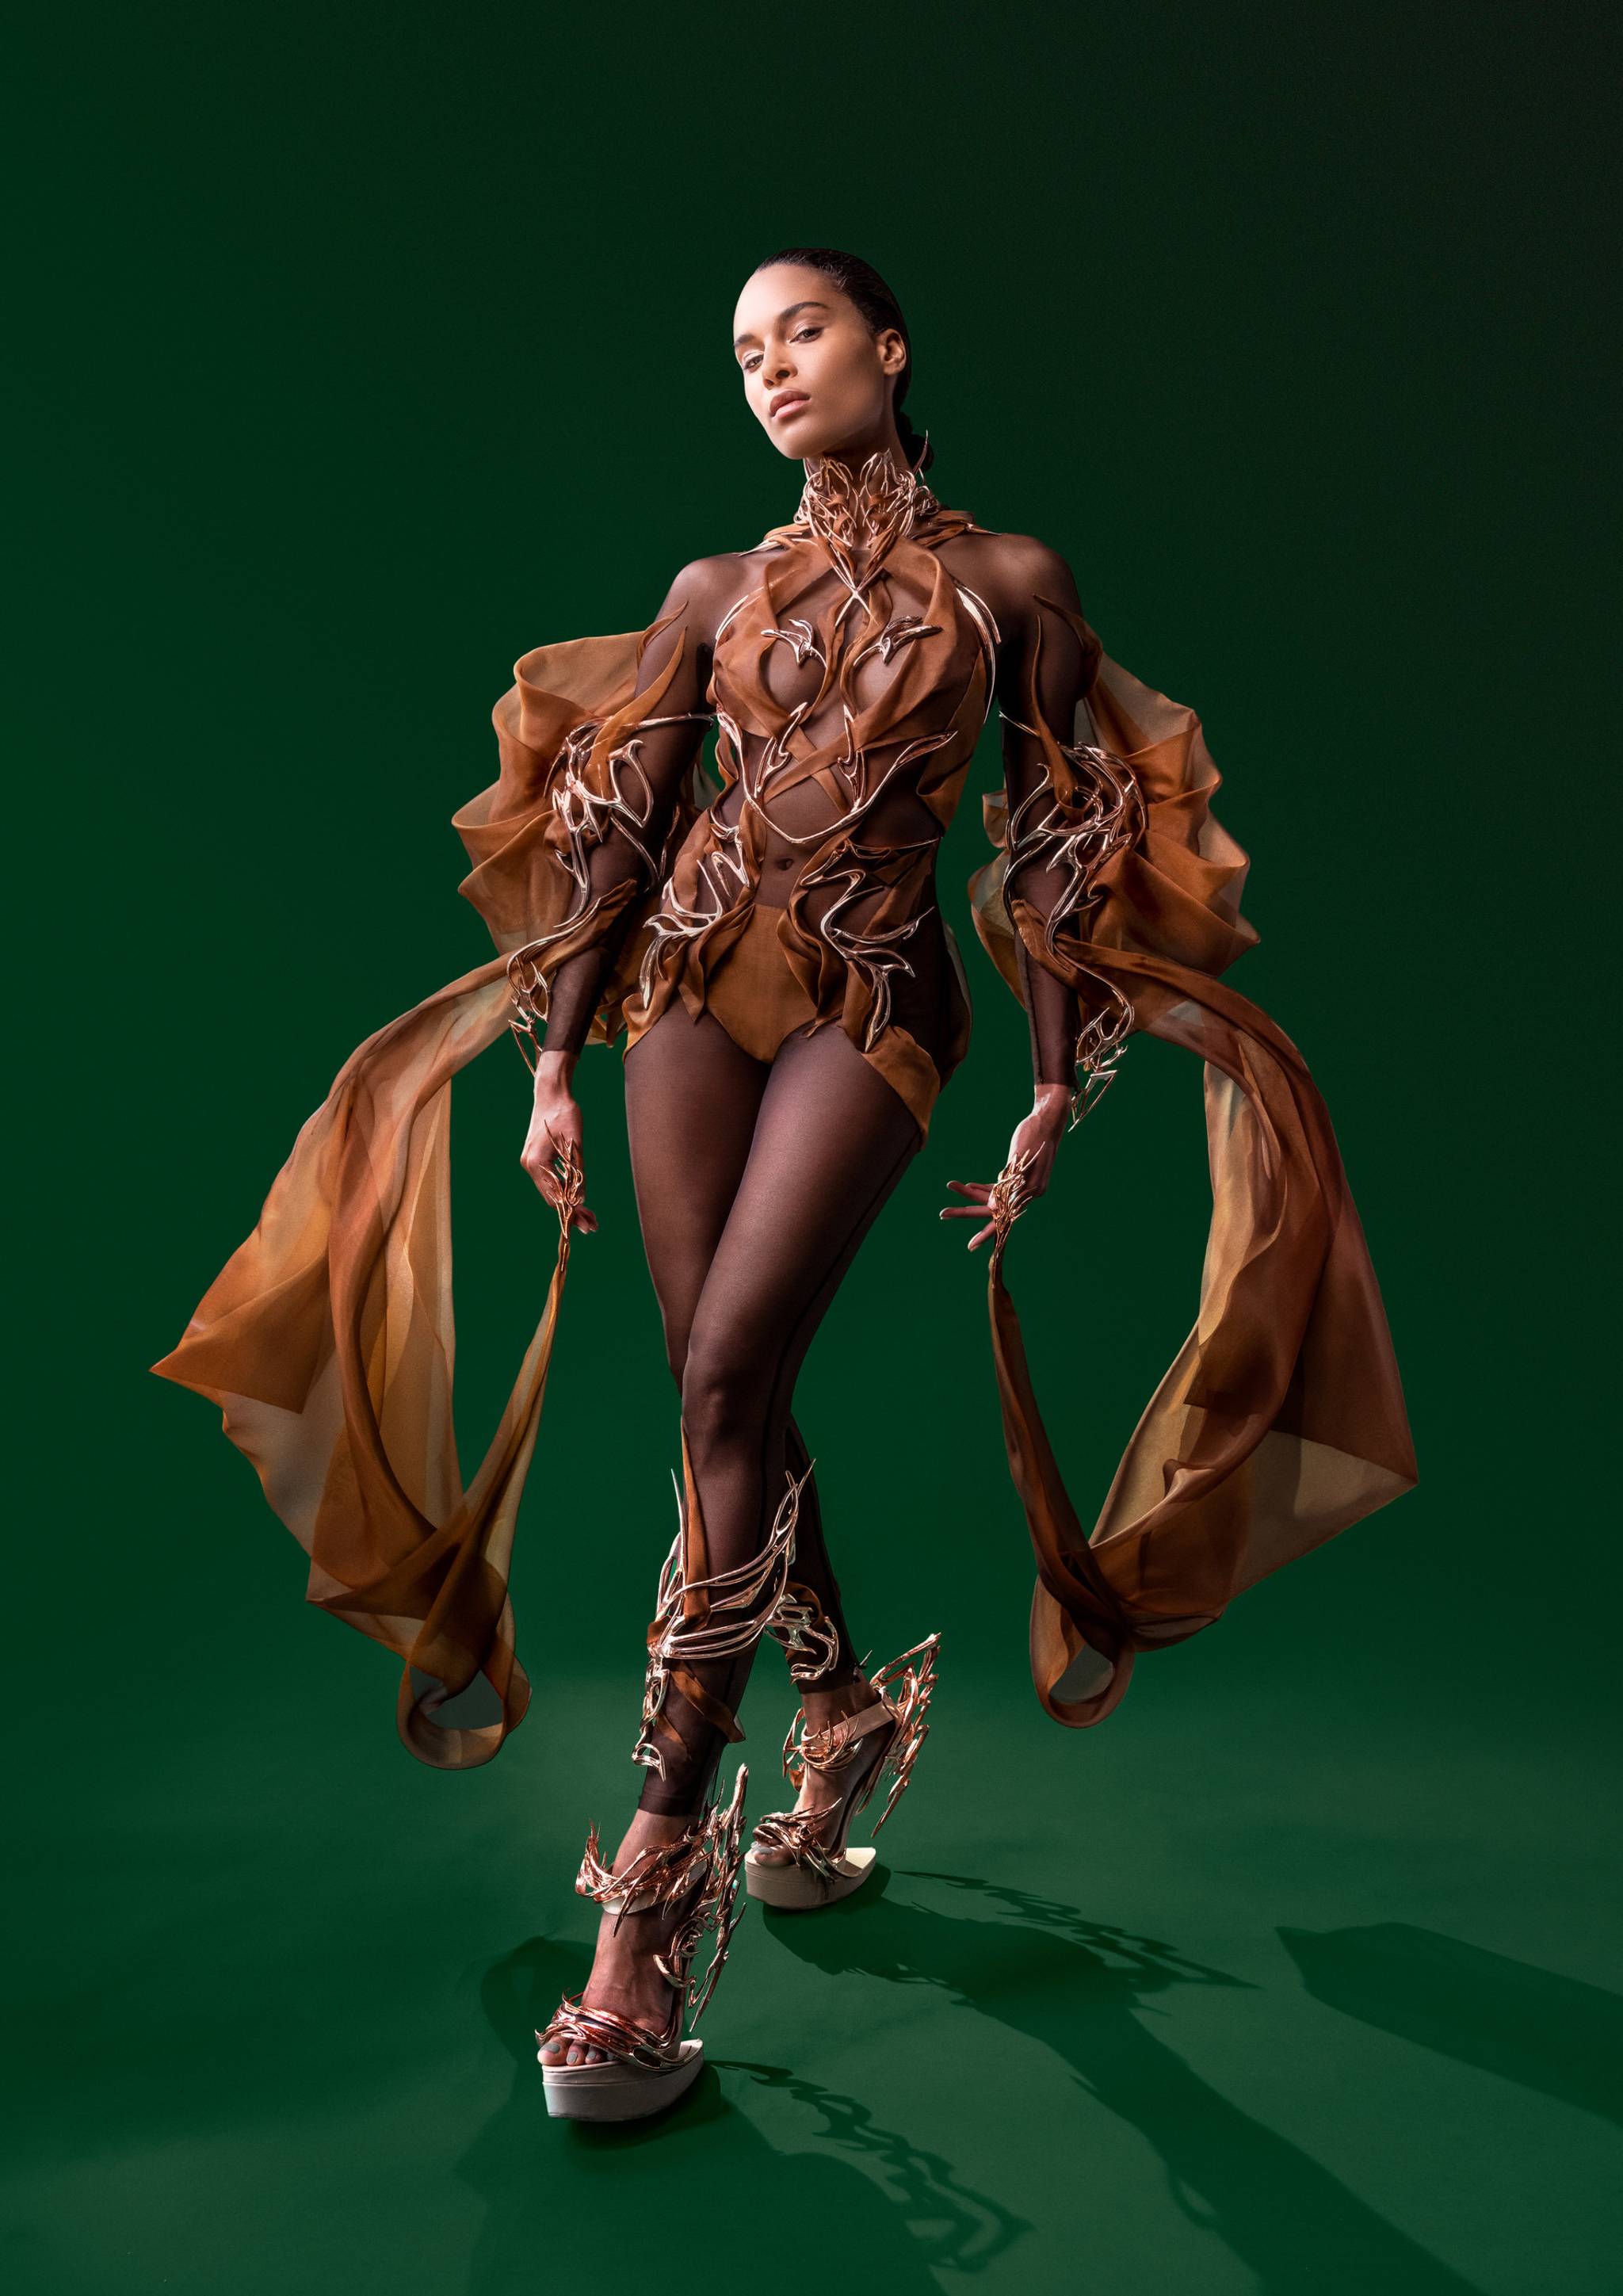 Magnum goes high fashion with upcycled cocoa bean dress